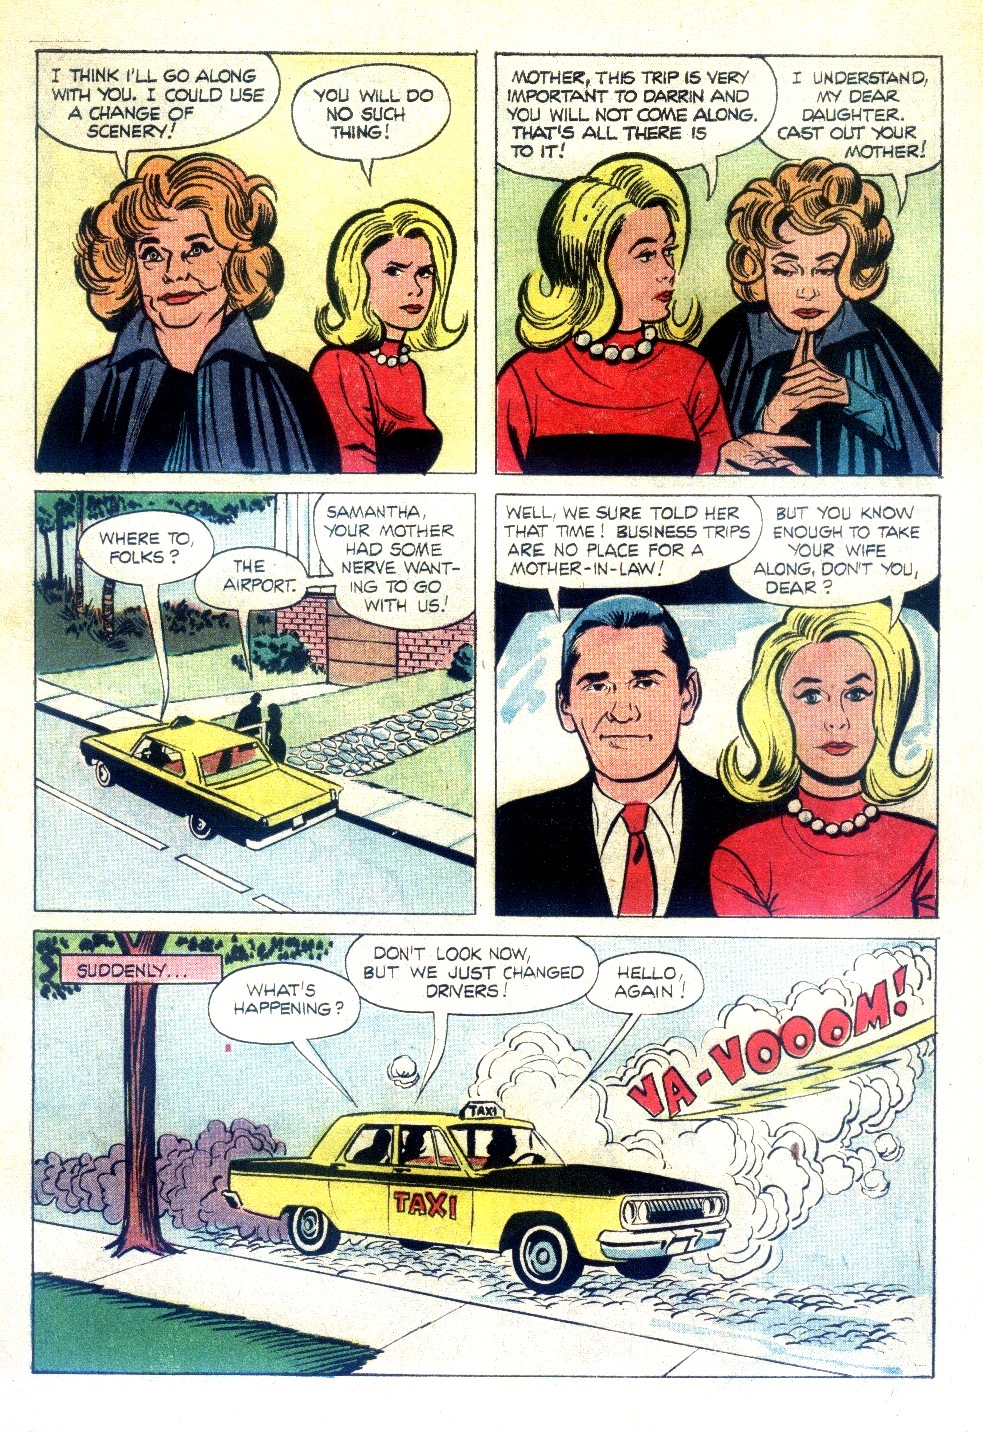 983px x 1432px - Bewitched Issue 2 | Read Bewitched Issue 2 comic online in high quality.  Read Full Comic online for free - Read comics online in high quality .